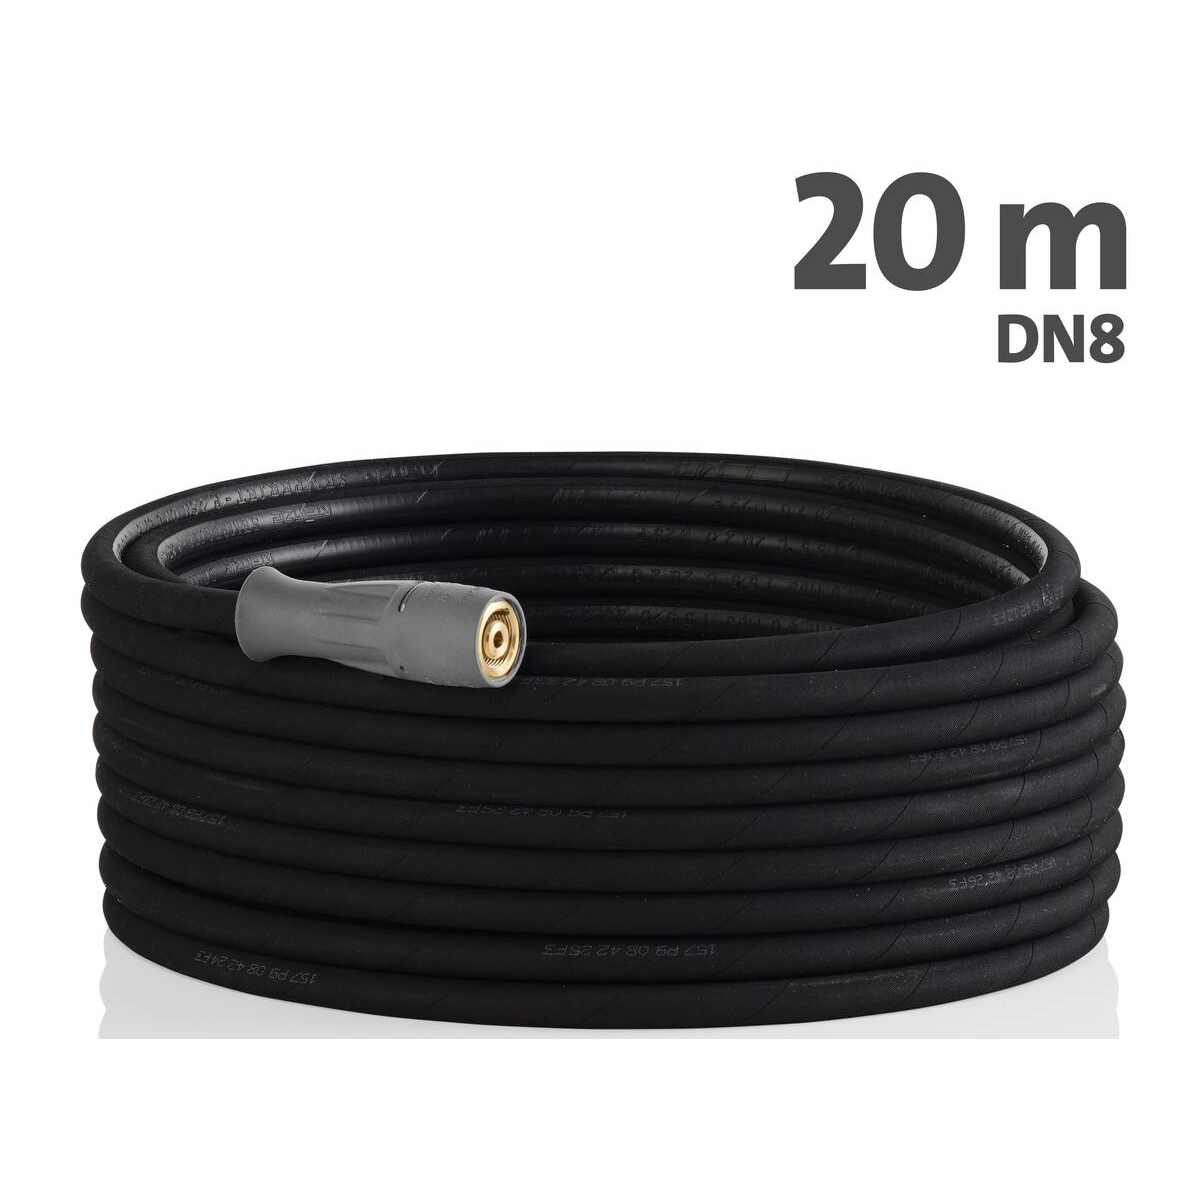 41083 - High Pressure Hose 20m - Double Wire